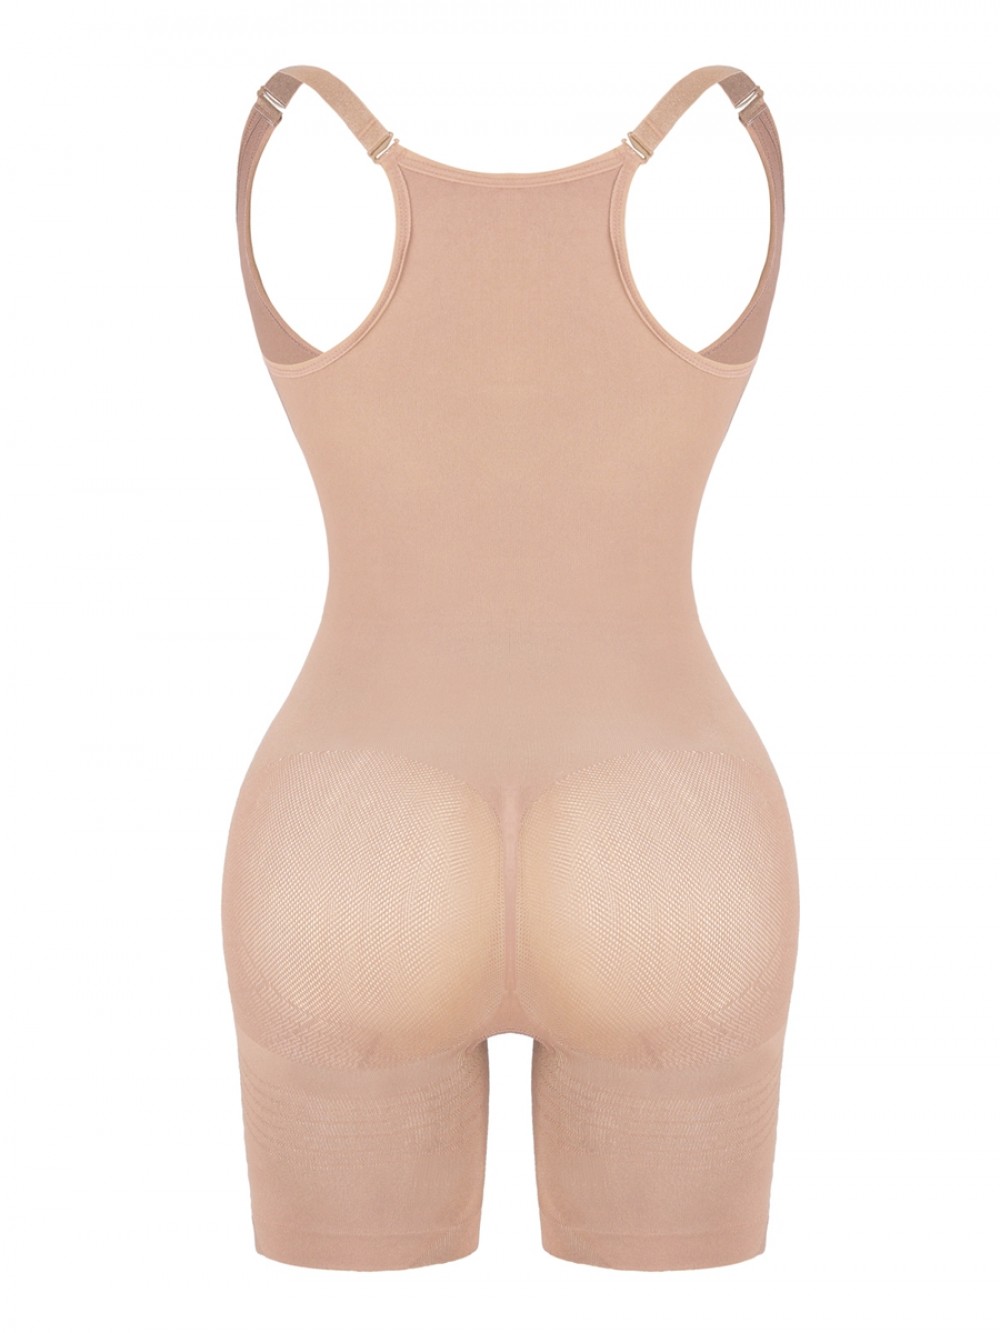 Nude Butt Lifter Large Size Seamless Body Shaper Curve Creator